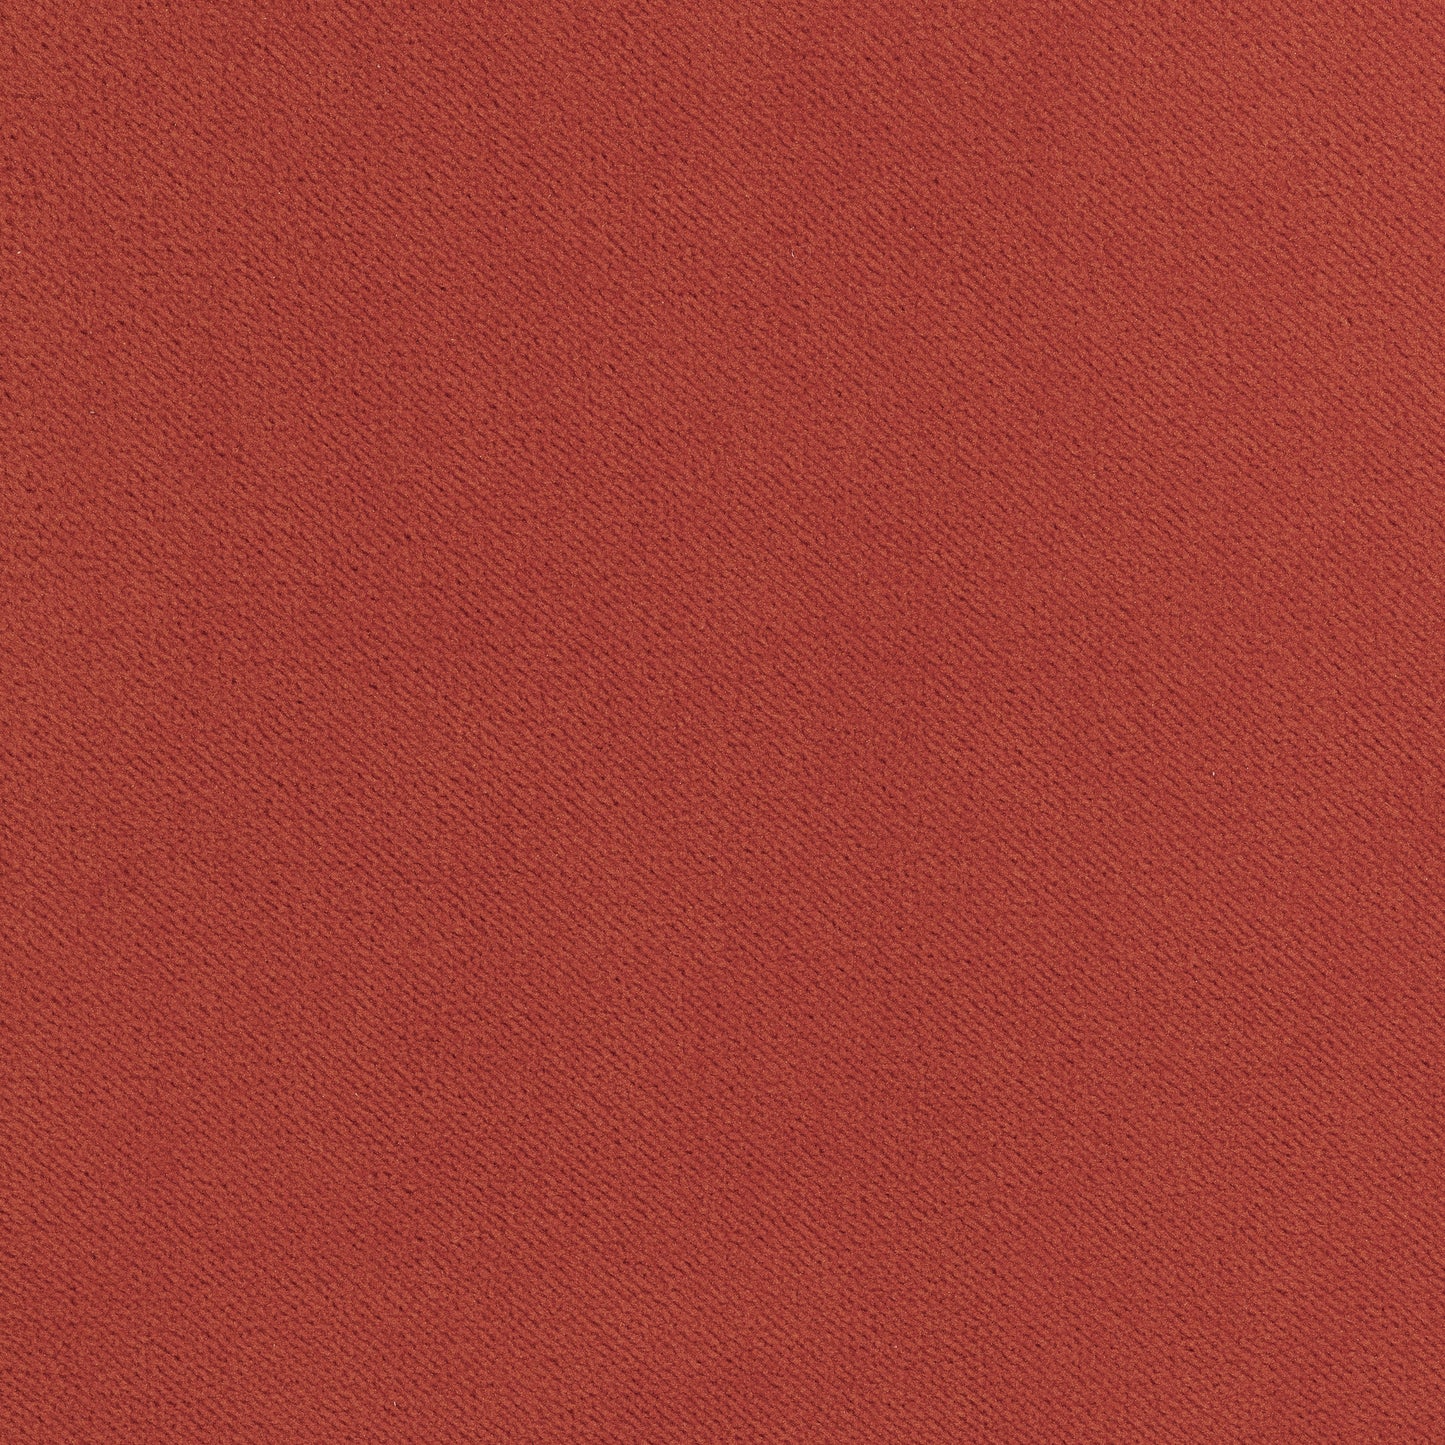 Purchase Thibaut Fabric Product# W7204 pattern name Club Velvet color Coral